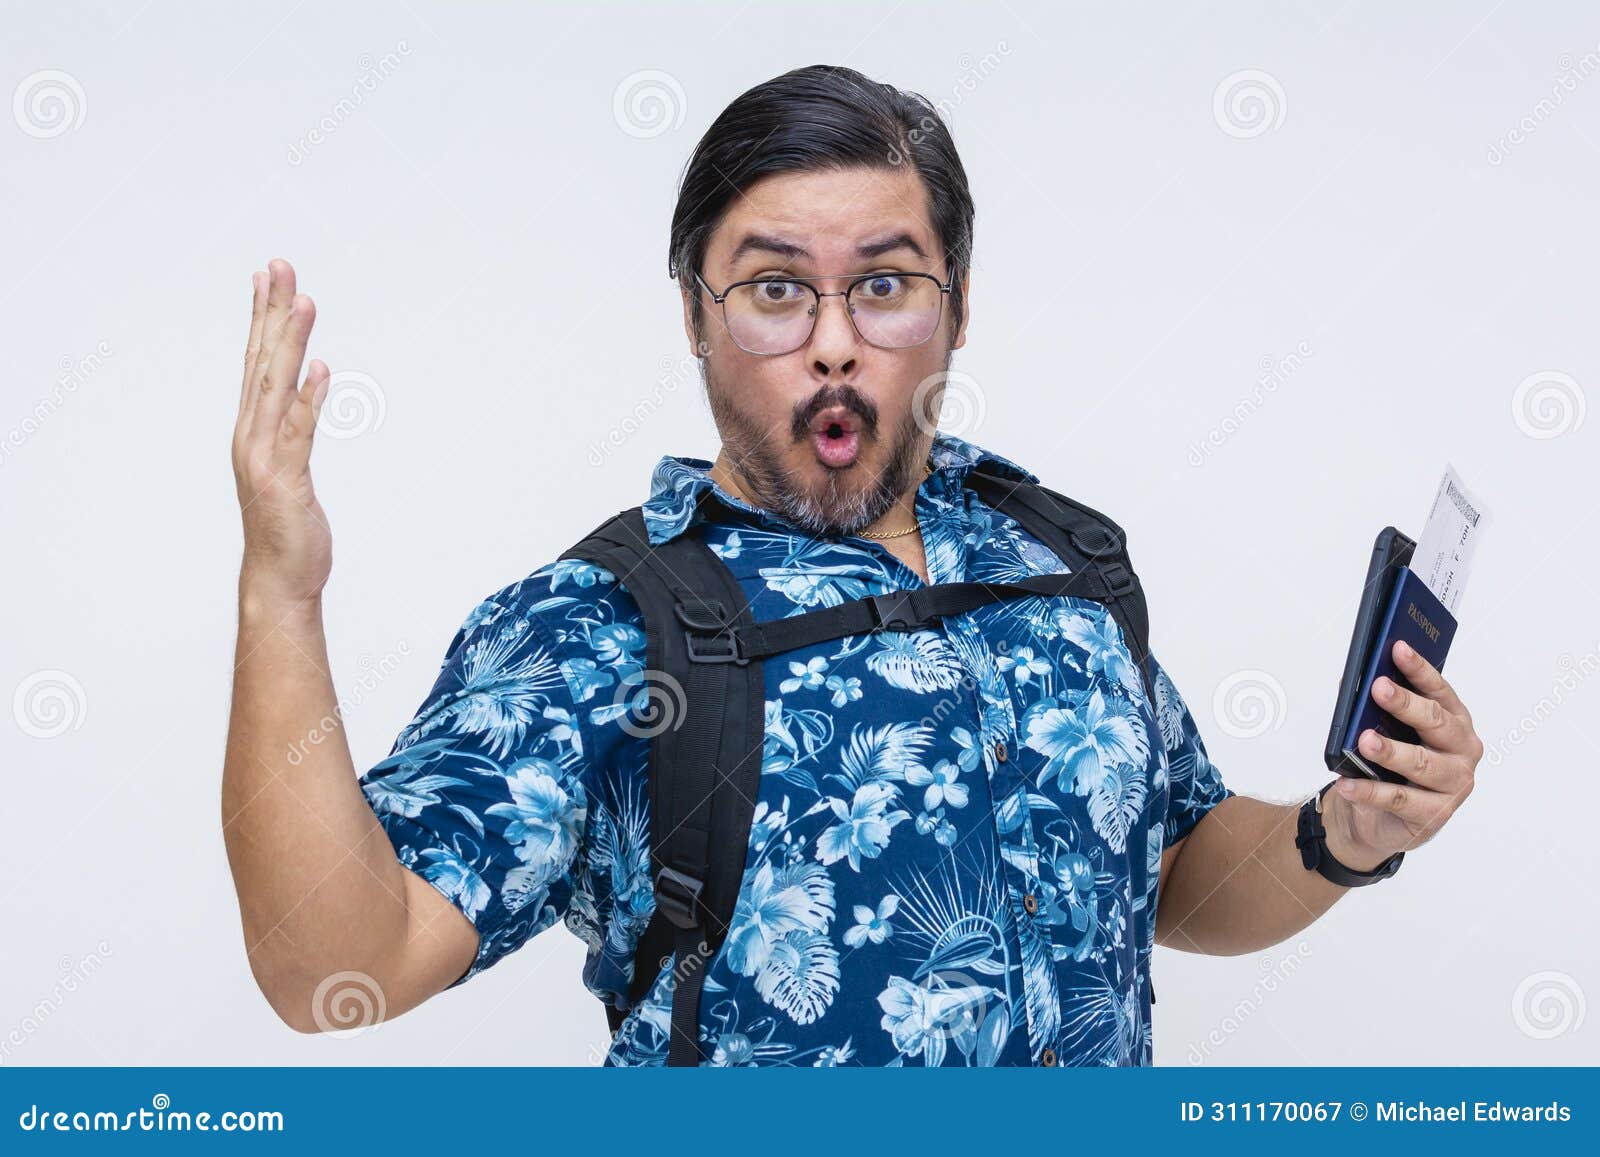 astounded male tourist in hawaiian shirt exclaiming ooh while holding a us passport and boarding pass,  on a white